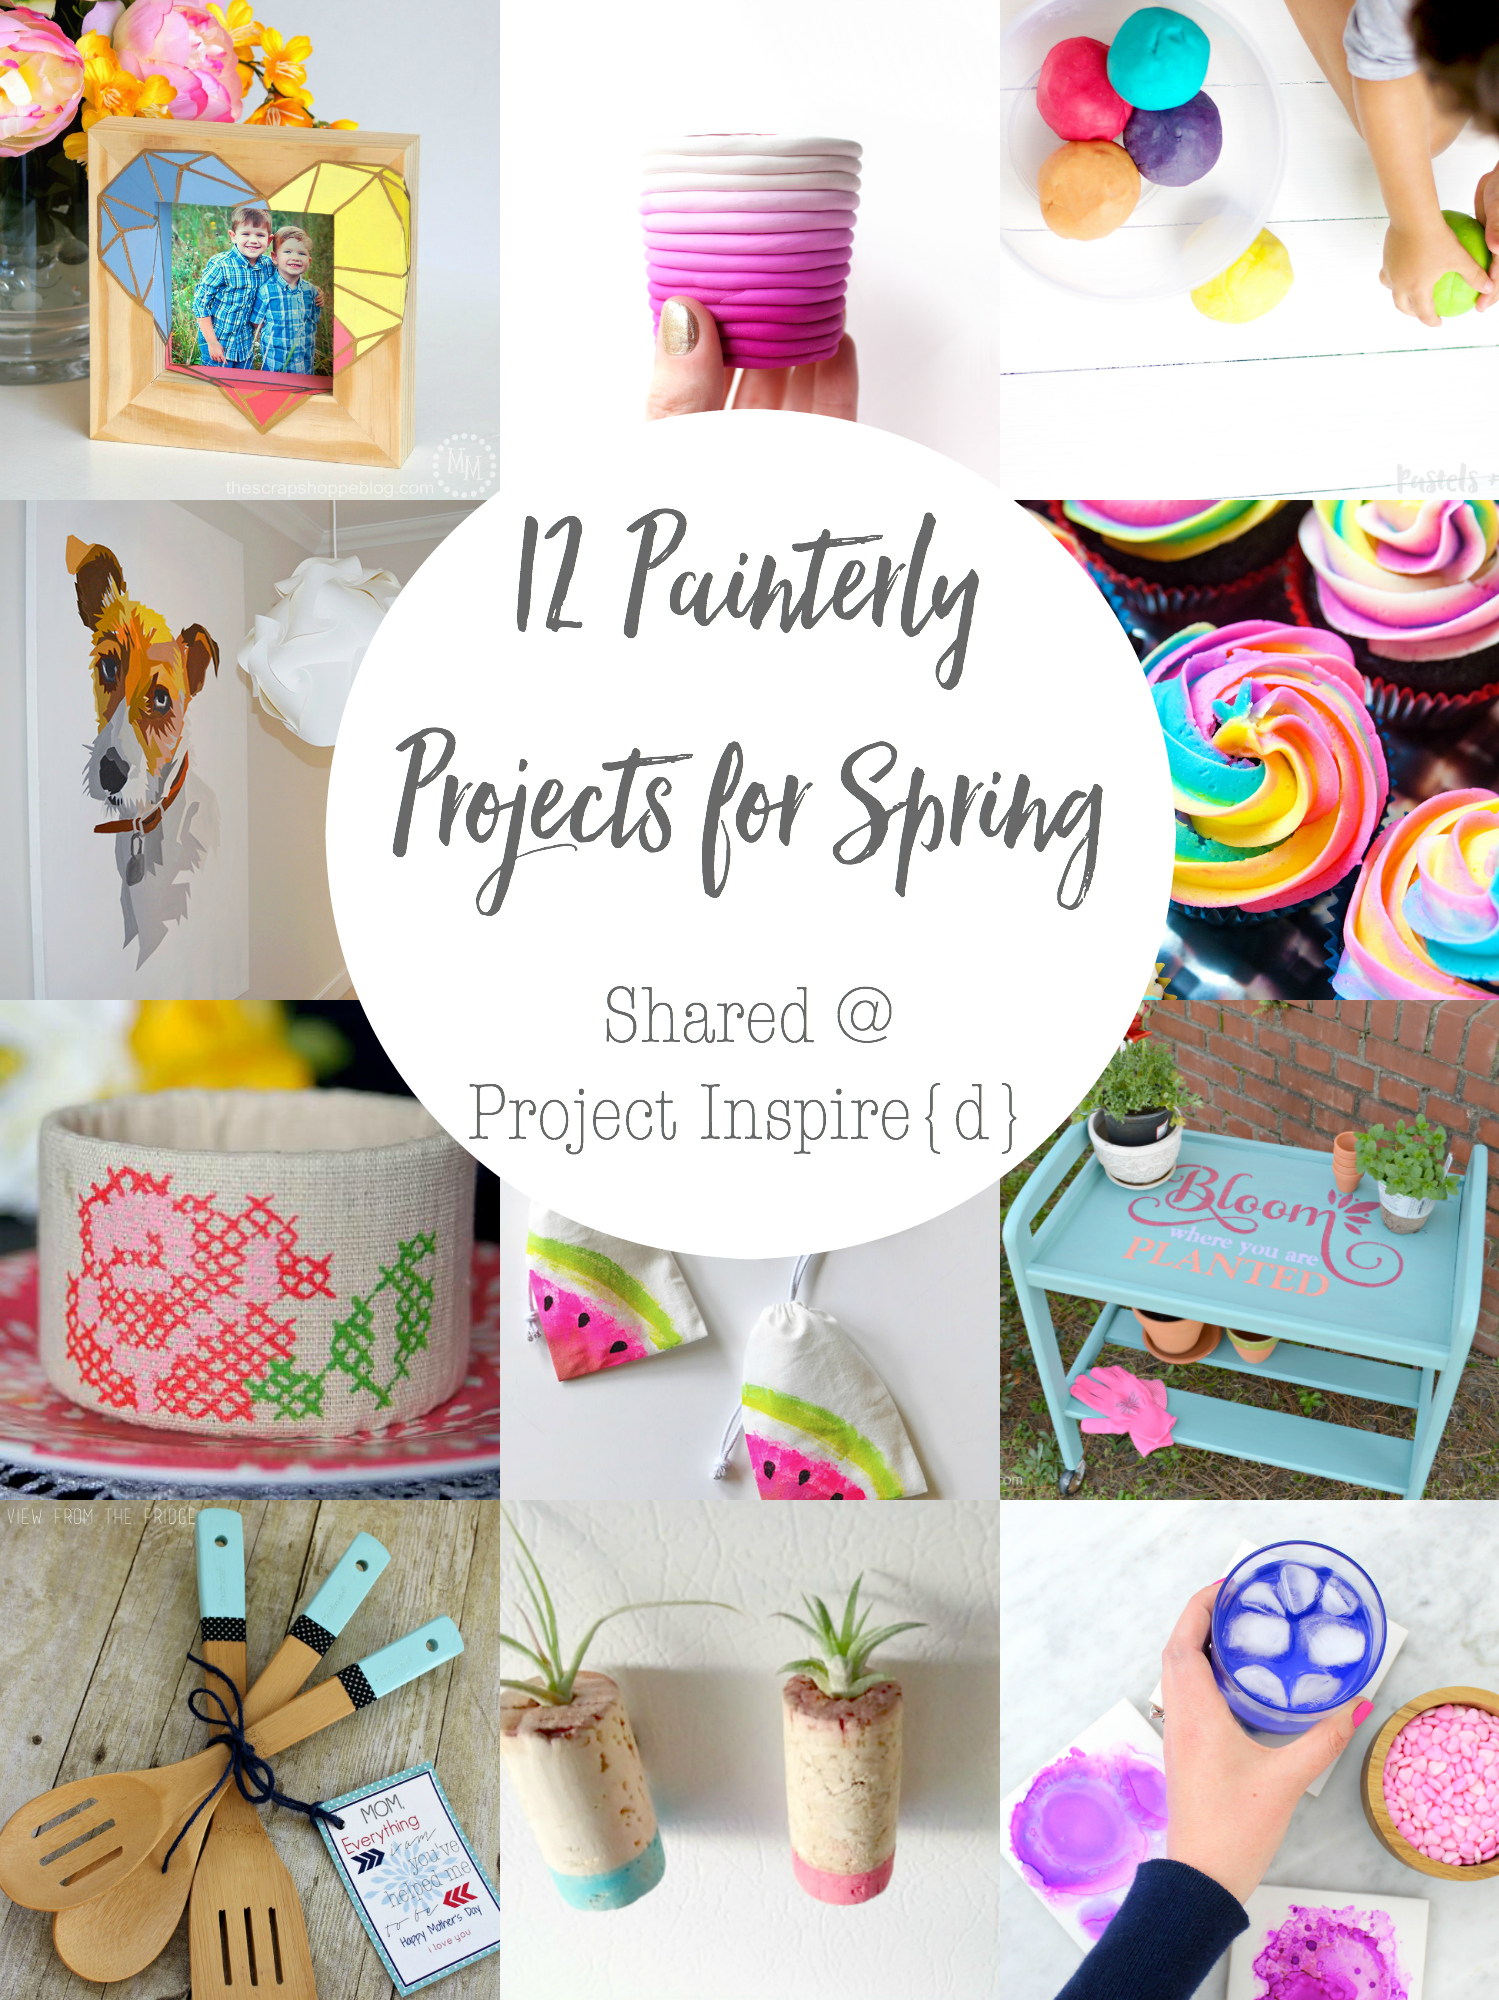 12 Painterly Projects for Spring